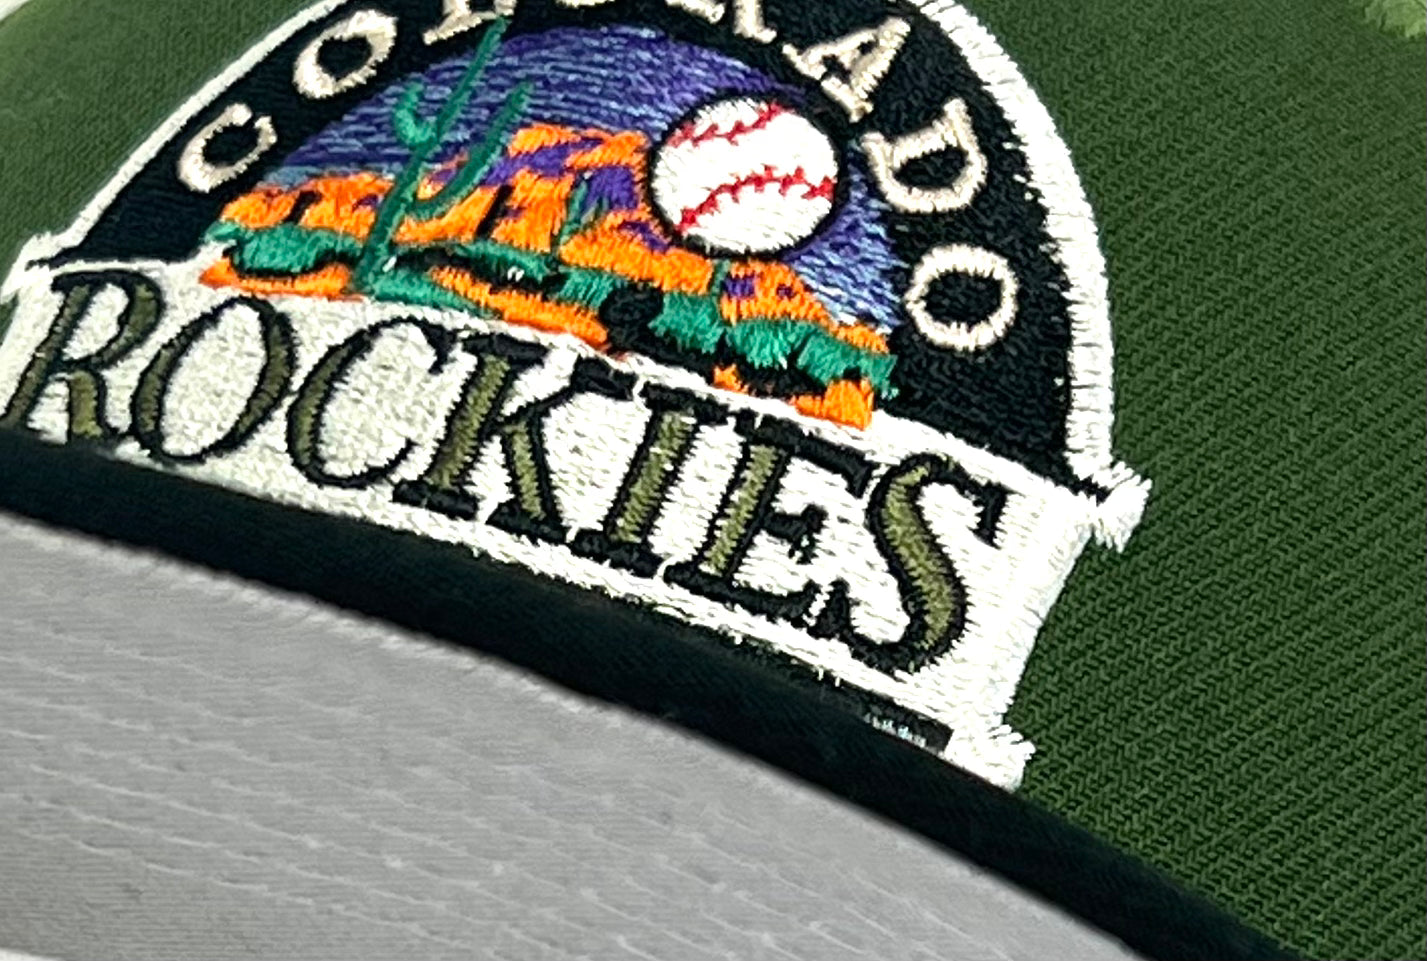 COLORADO ROCKIES (OLIVE) (1995 COORS FIELD) NEW ERA 59FIFTY FITTED